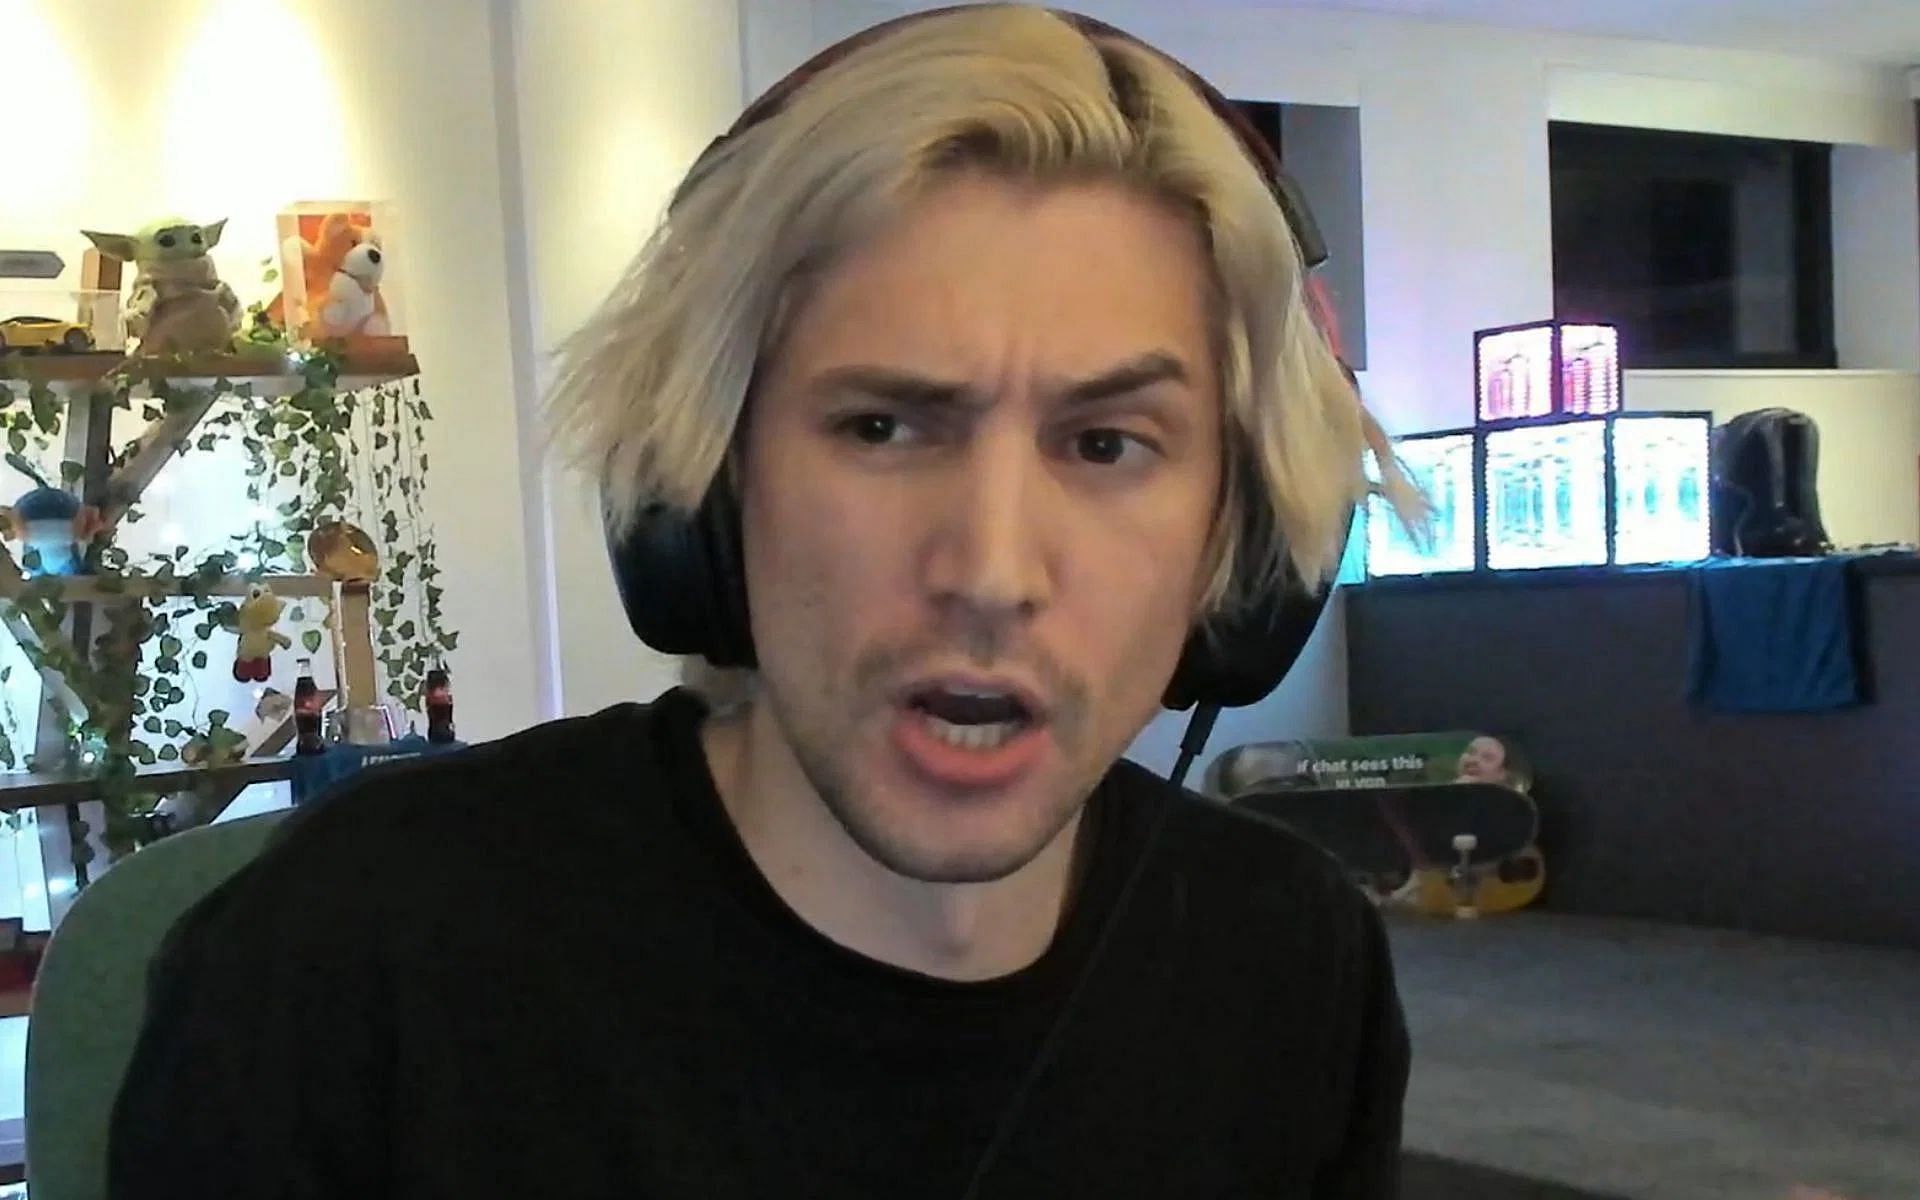 &quot;Your company has fallen off&quot; - xQc goes on an explosive rant against Nintendo amid Palworld